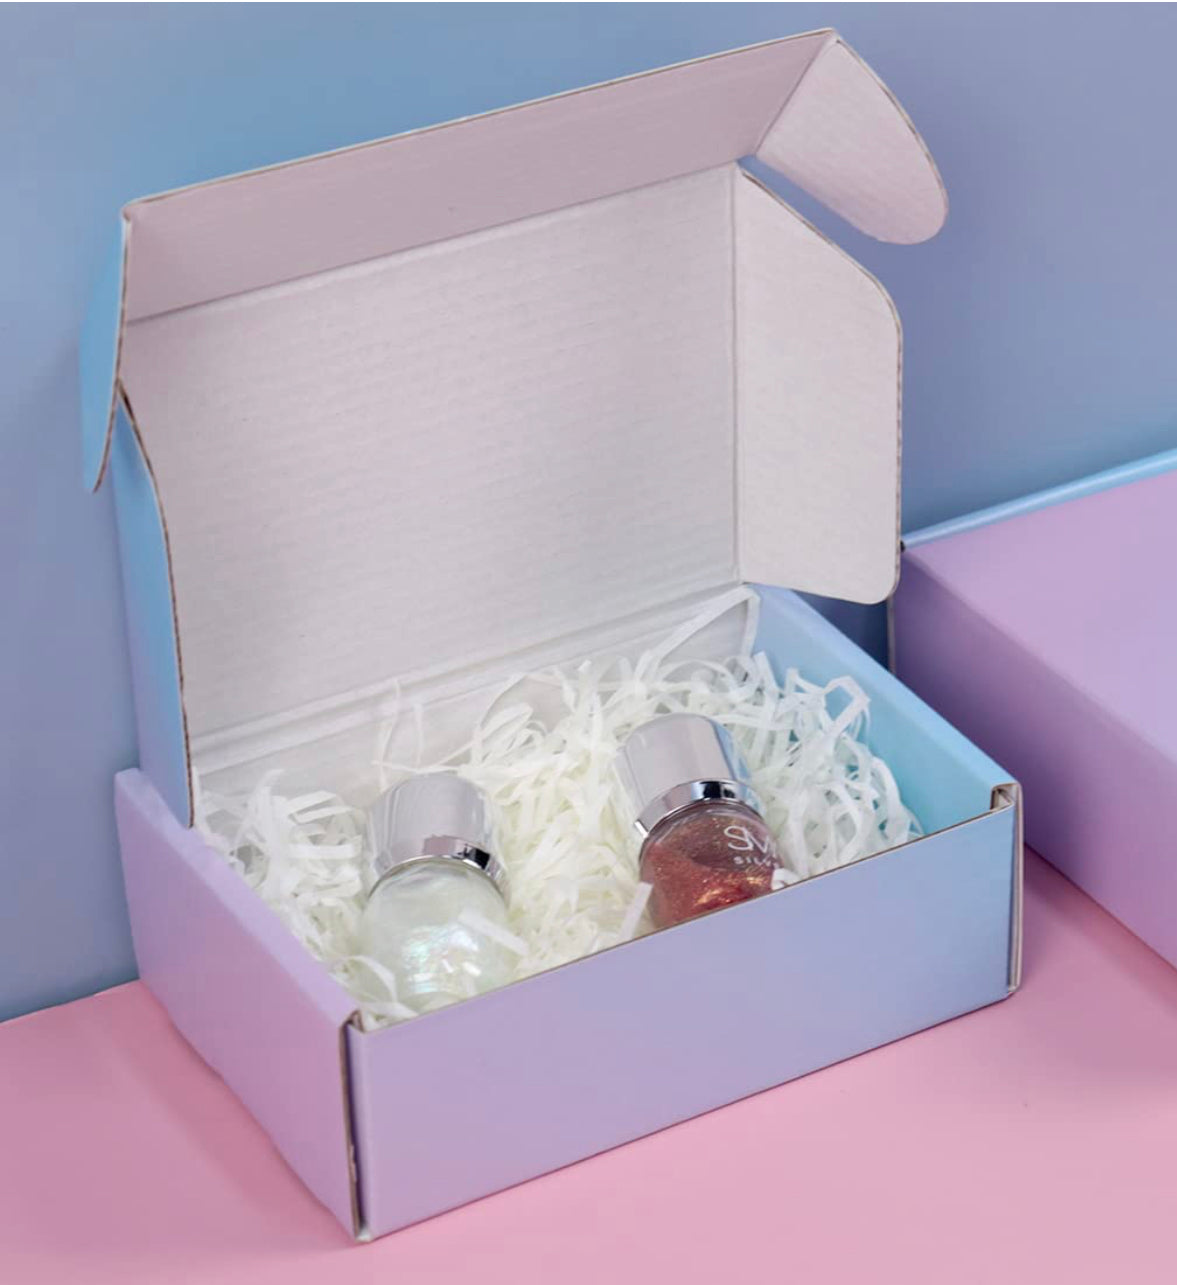 Crystal intuitive pick box